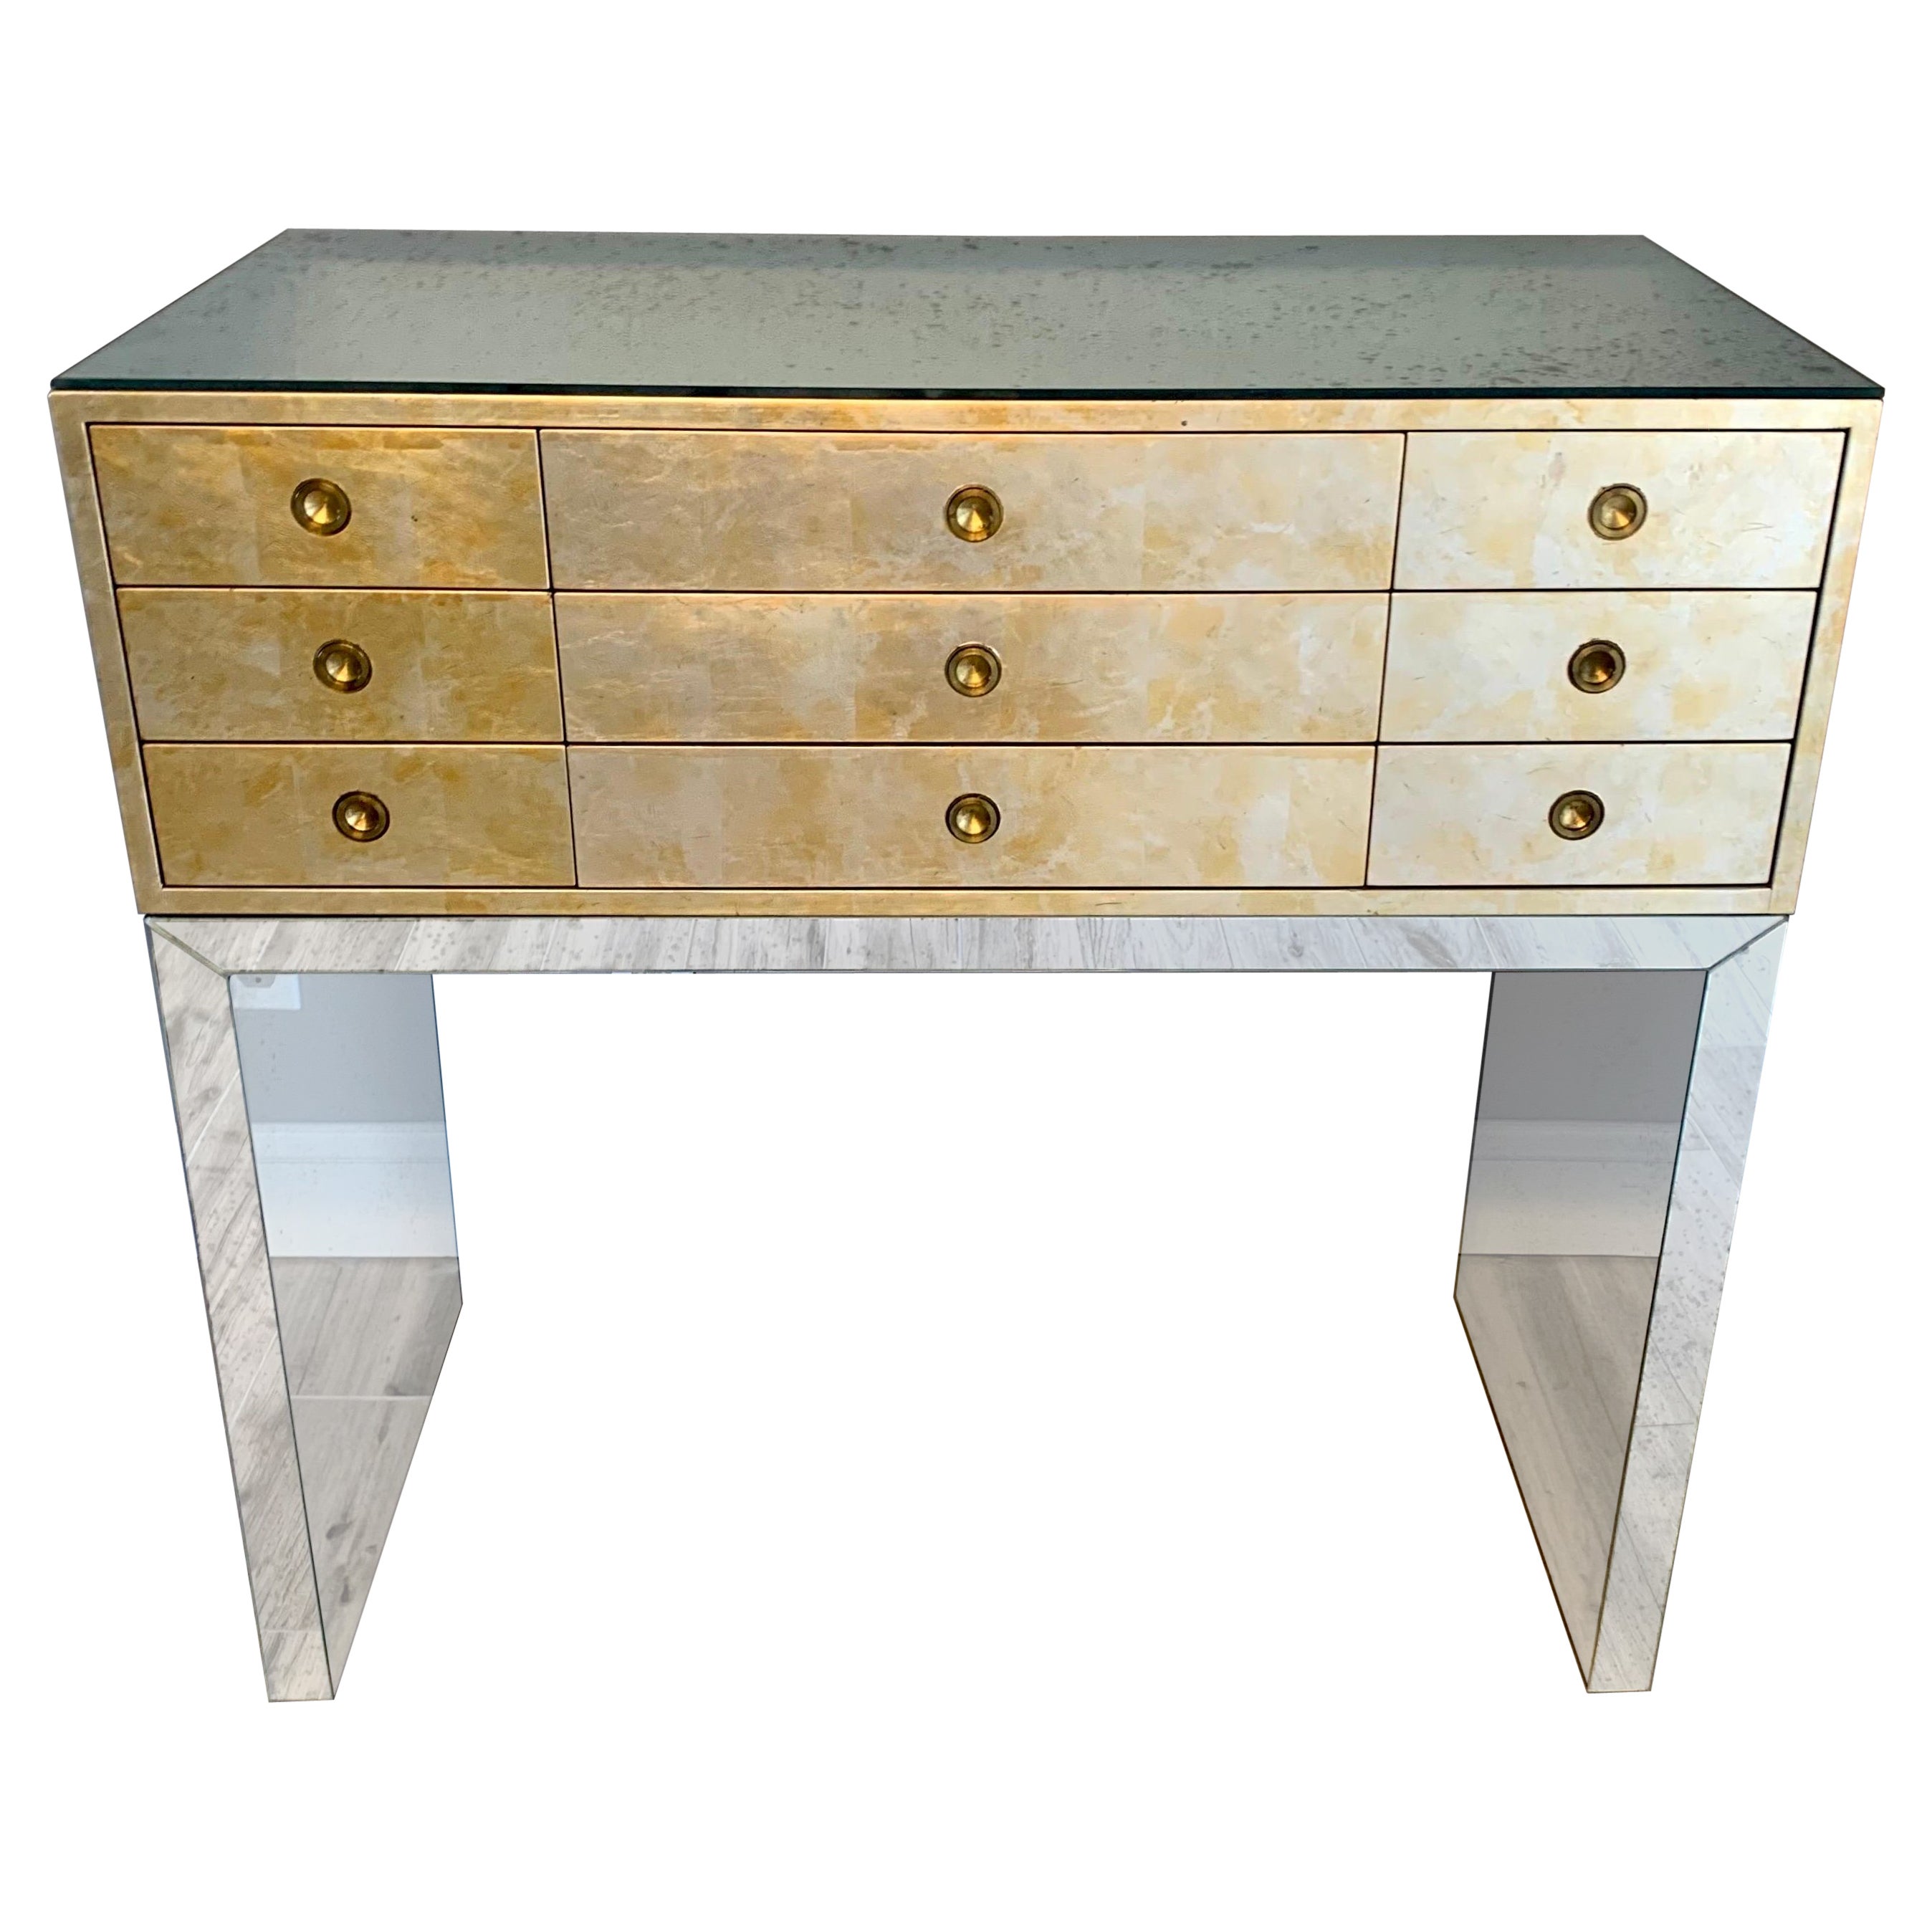 Mid Century Kittinger Gold Leaf Chest of Drawers on Antiqued Mirror Base, 1950s